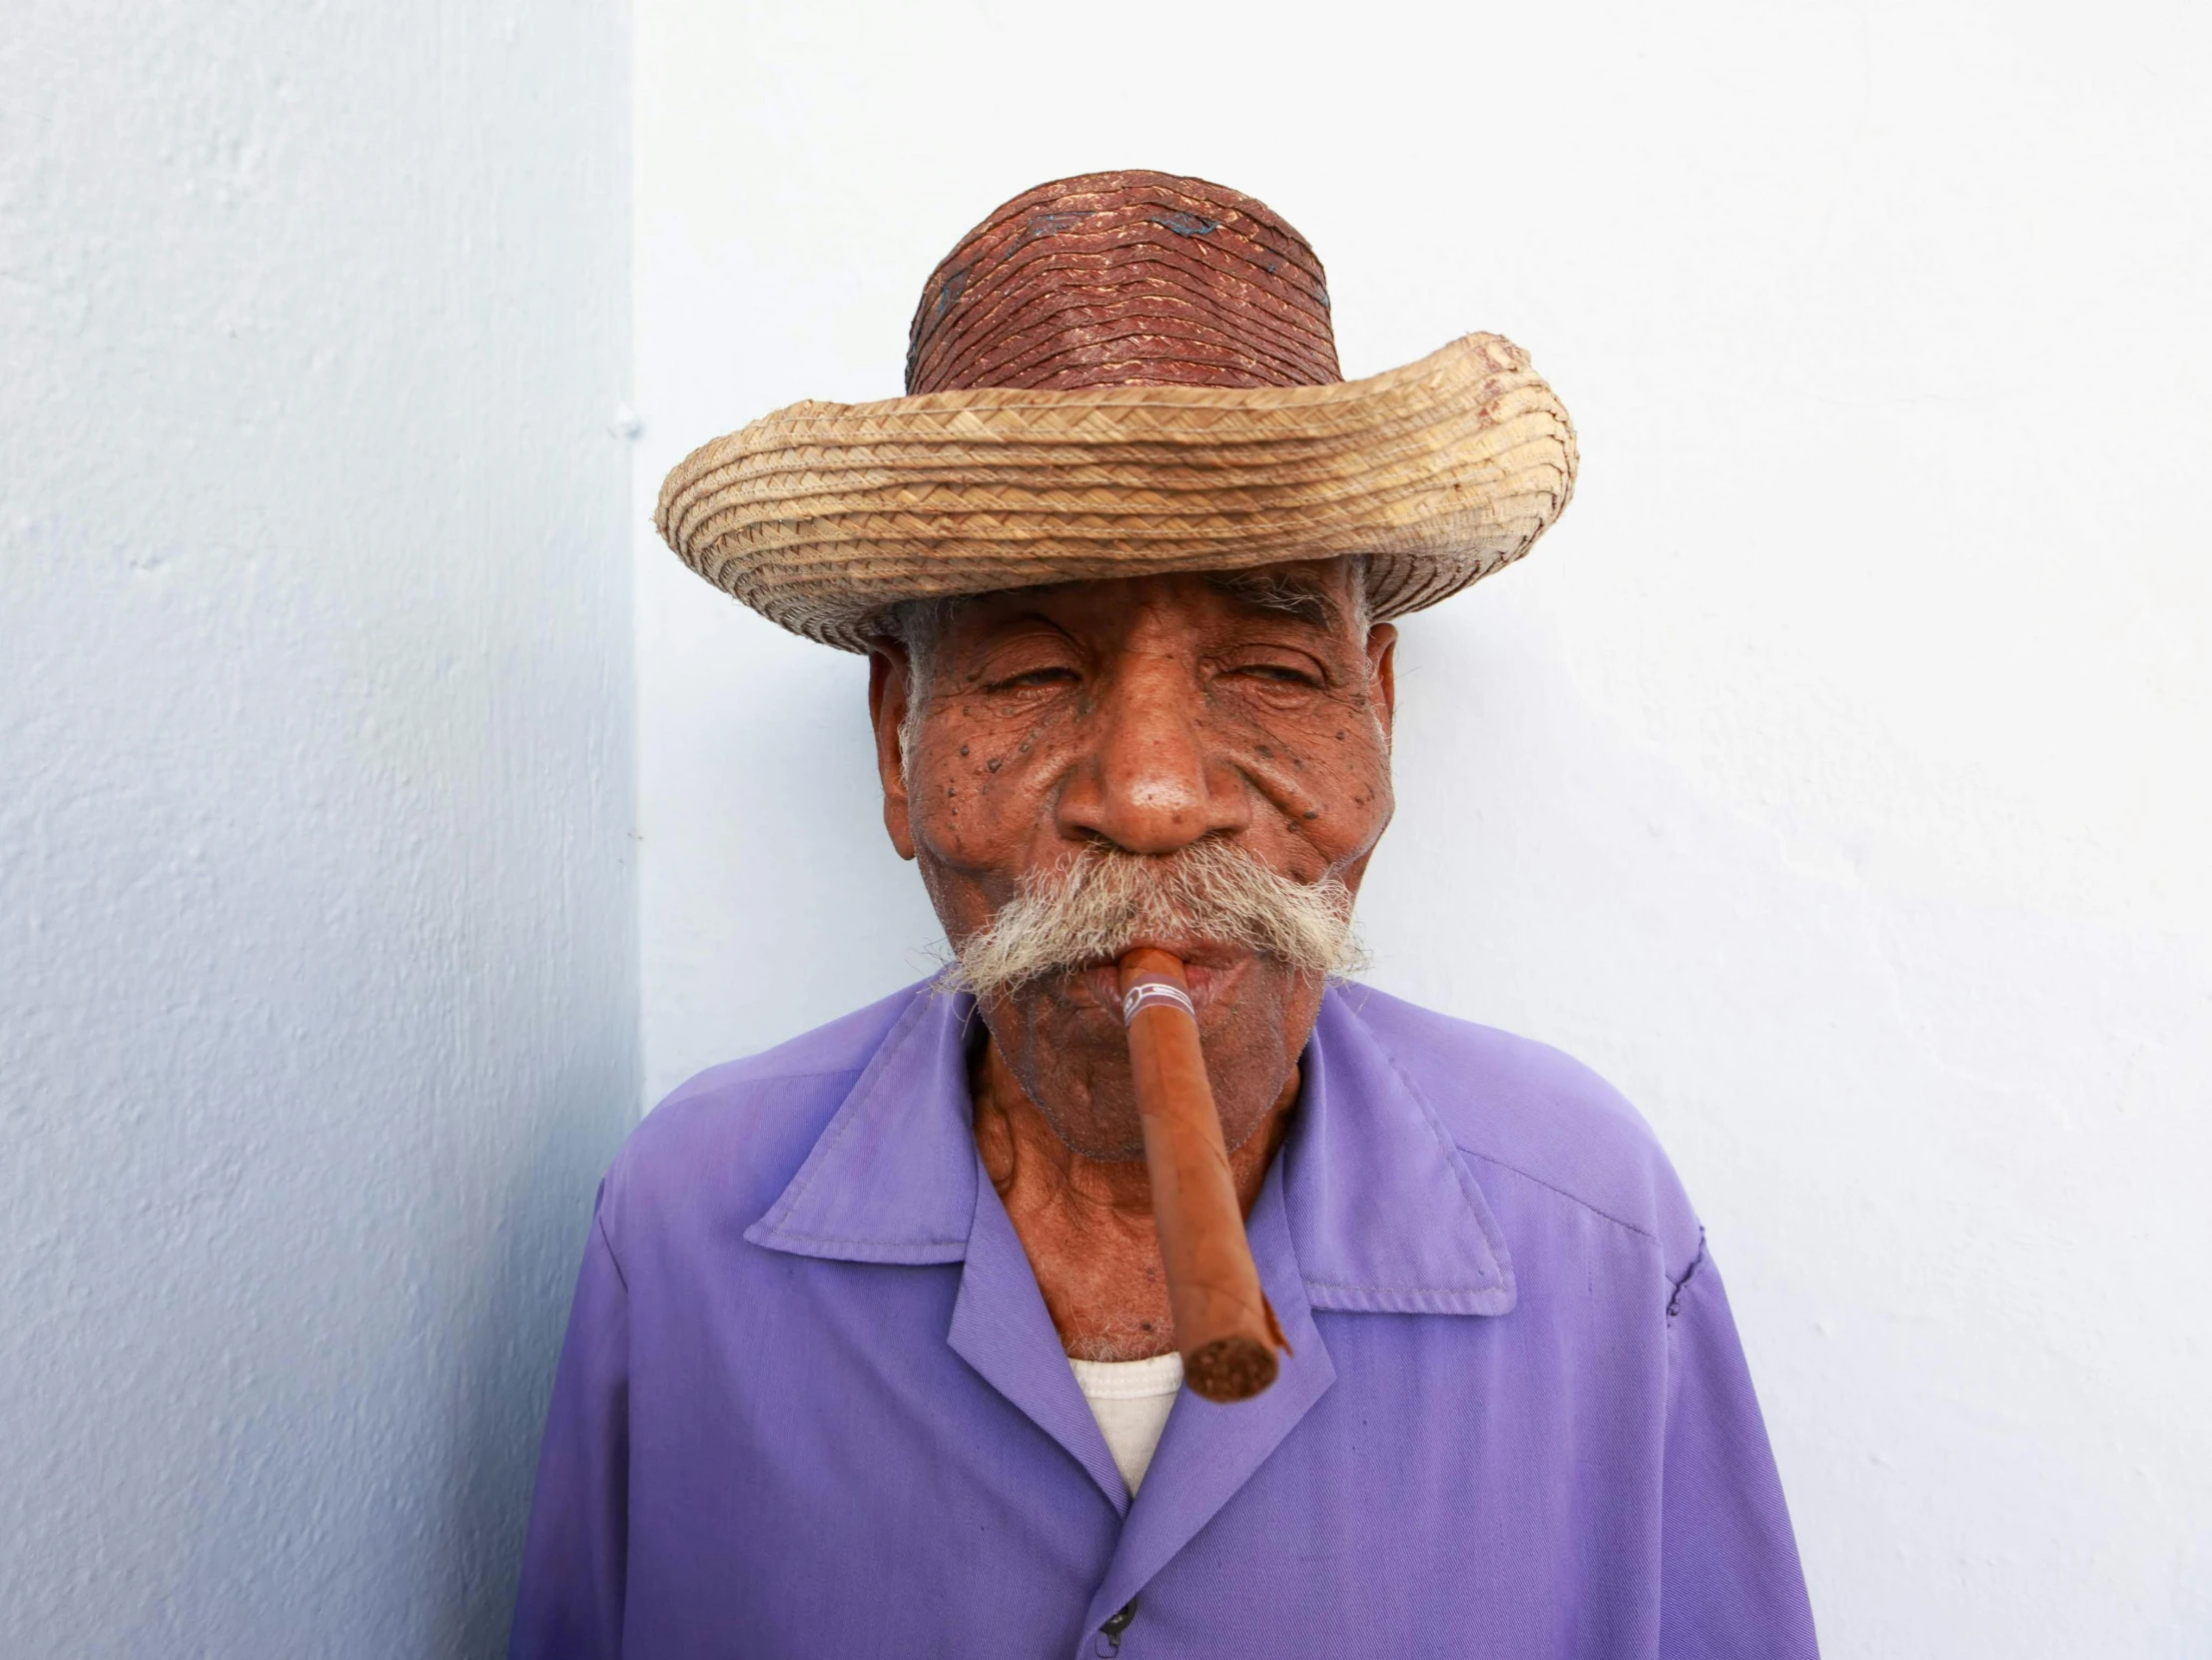 a man with a pipe in his mouth and purple shirt